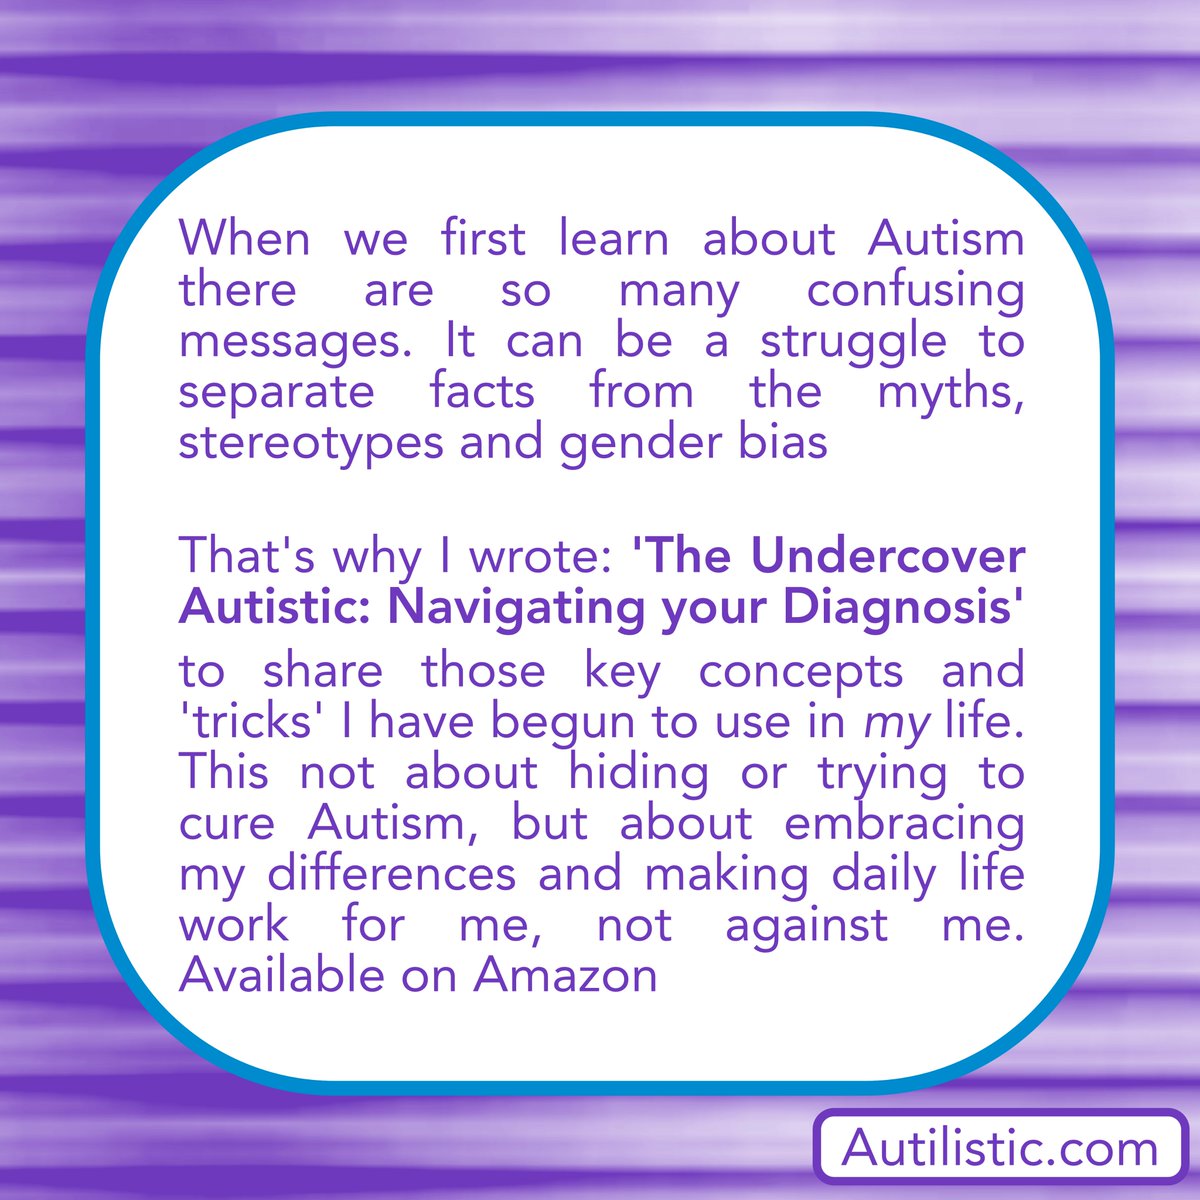 Born worrier or problem solver? What if some autistic anxiety could be thought of as ‘strategic thinking’? autilistic.com #autism #neurodivergent #autismawareness #autisticadults #autisticwomen #latediagnosedautistic